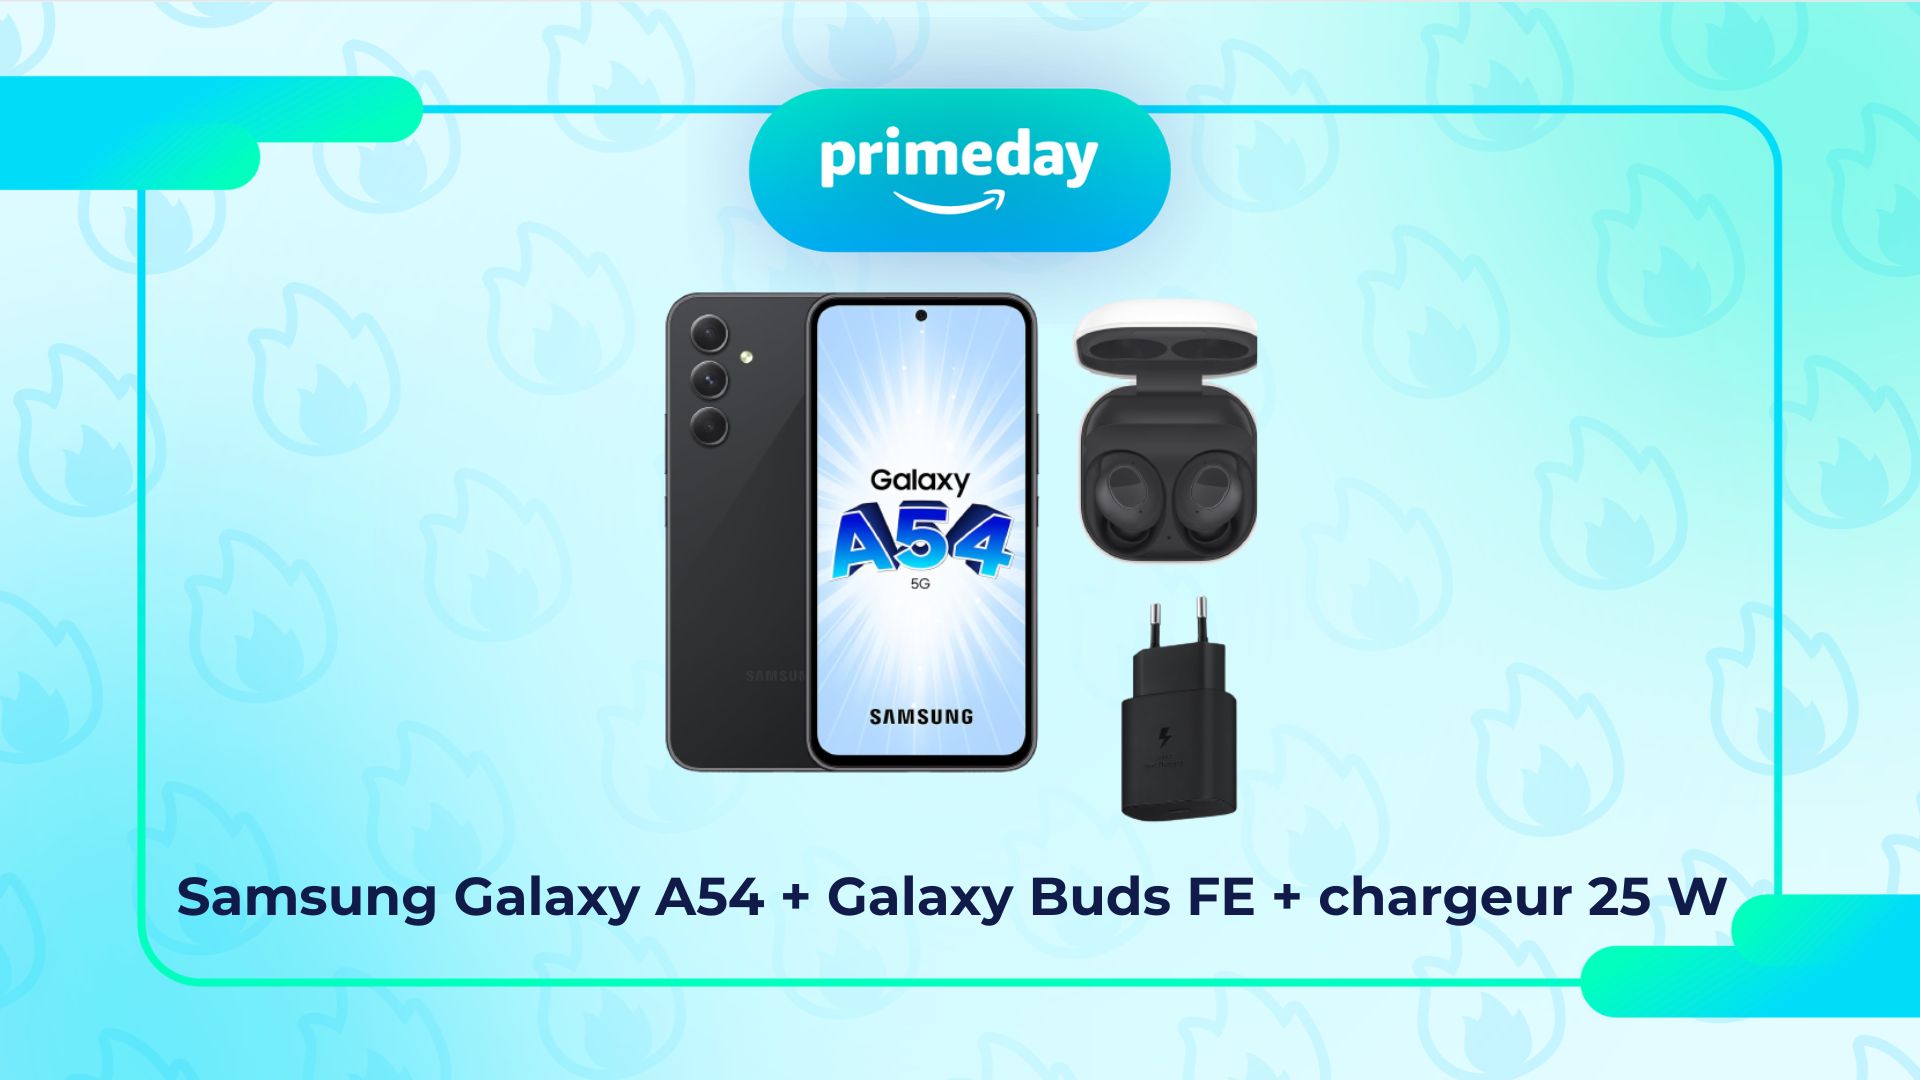 https://images.frandroid.com/wp-content/uploads/2023/10/samsung-galaxy-a54-galaxy-buds-fe-chargeur-prime-day-2023.jpg